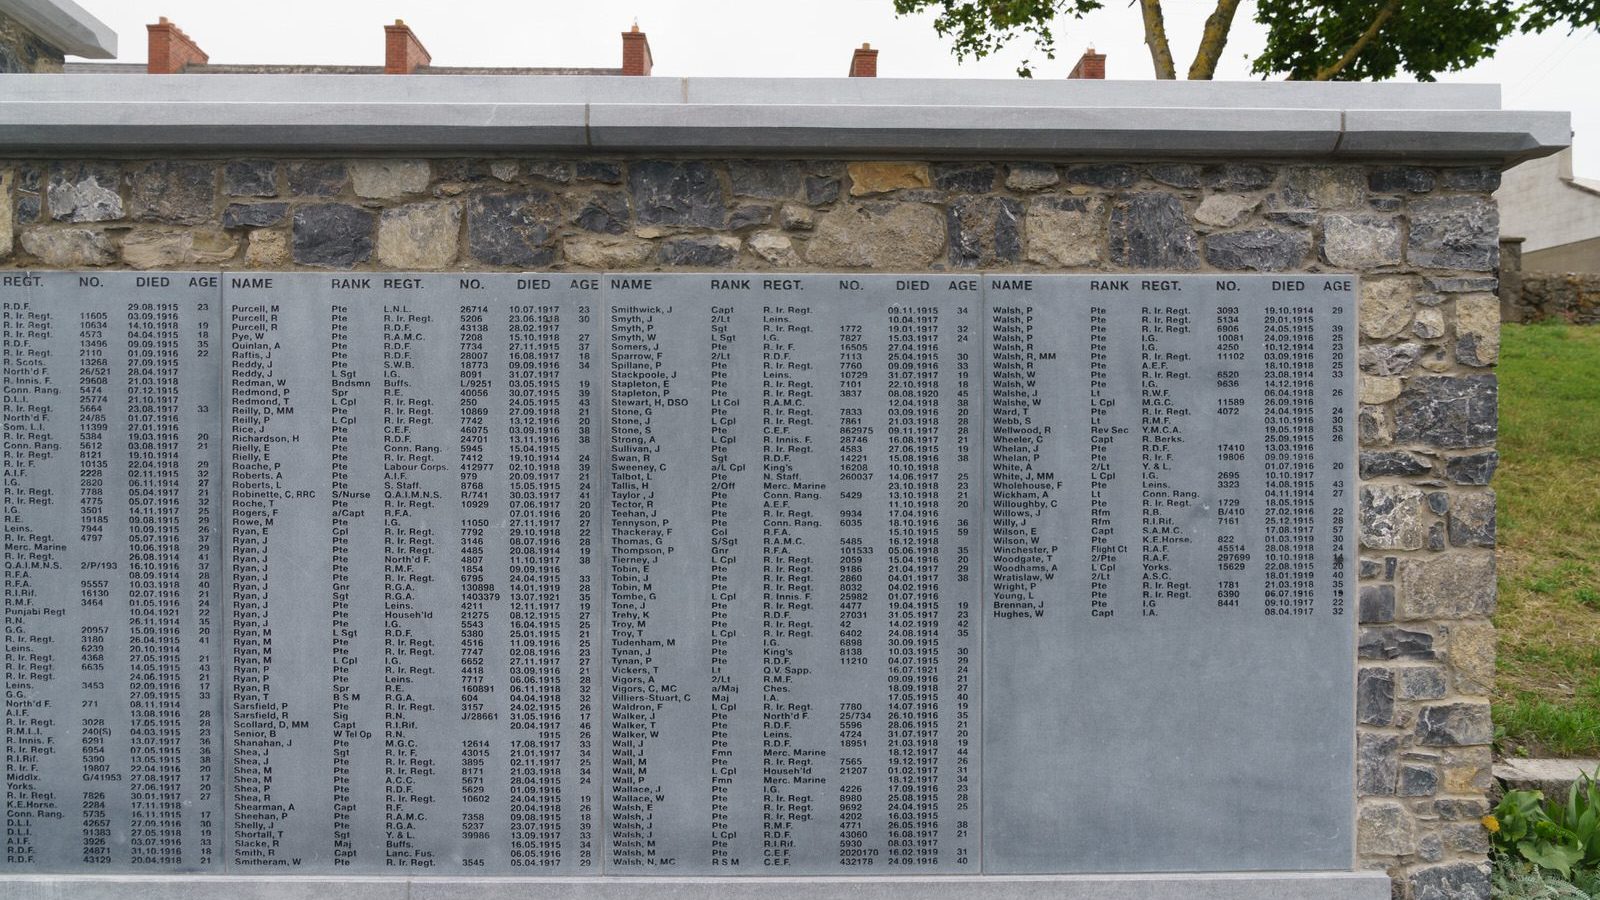 THE FIRST WORLD WAR MEMORIAL UNVEILED IN 2018 AT THE PEACE PARK IN KILKENNY [ALSO THE STORY OF 14 YEAR OLD THOMAS WOODGATE]-226813-1